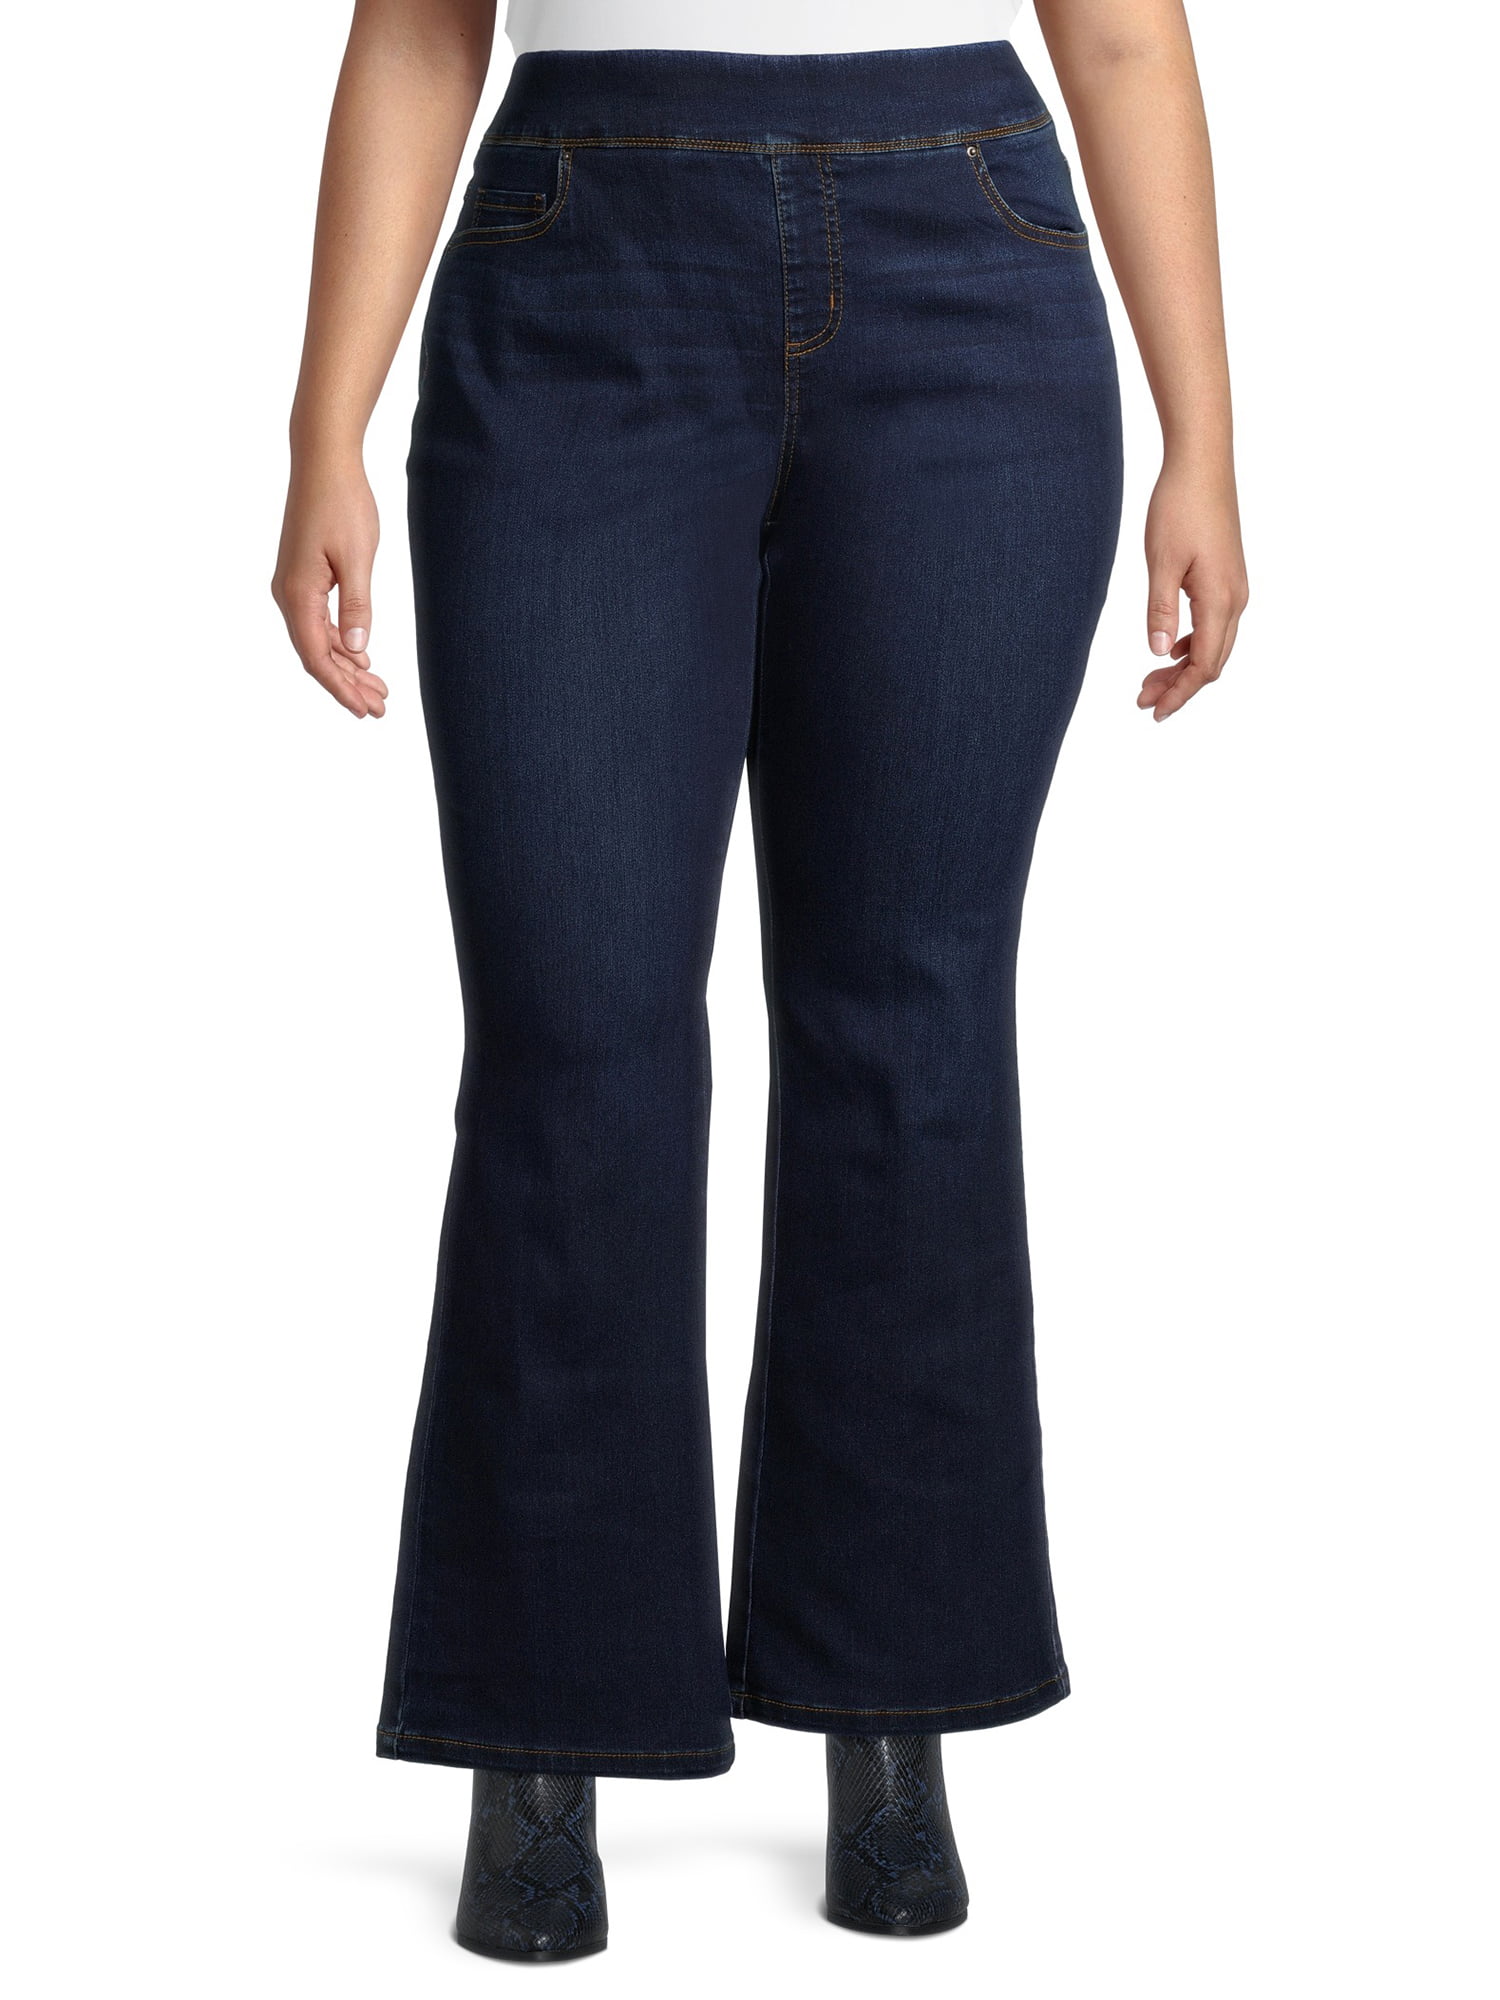 terra and sky jeans bootcut